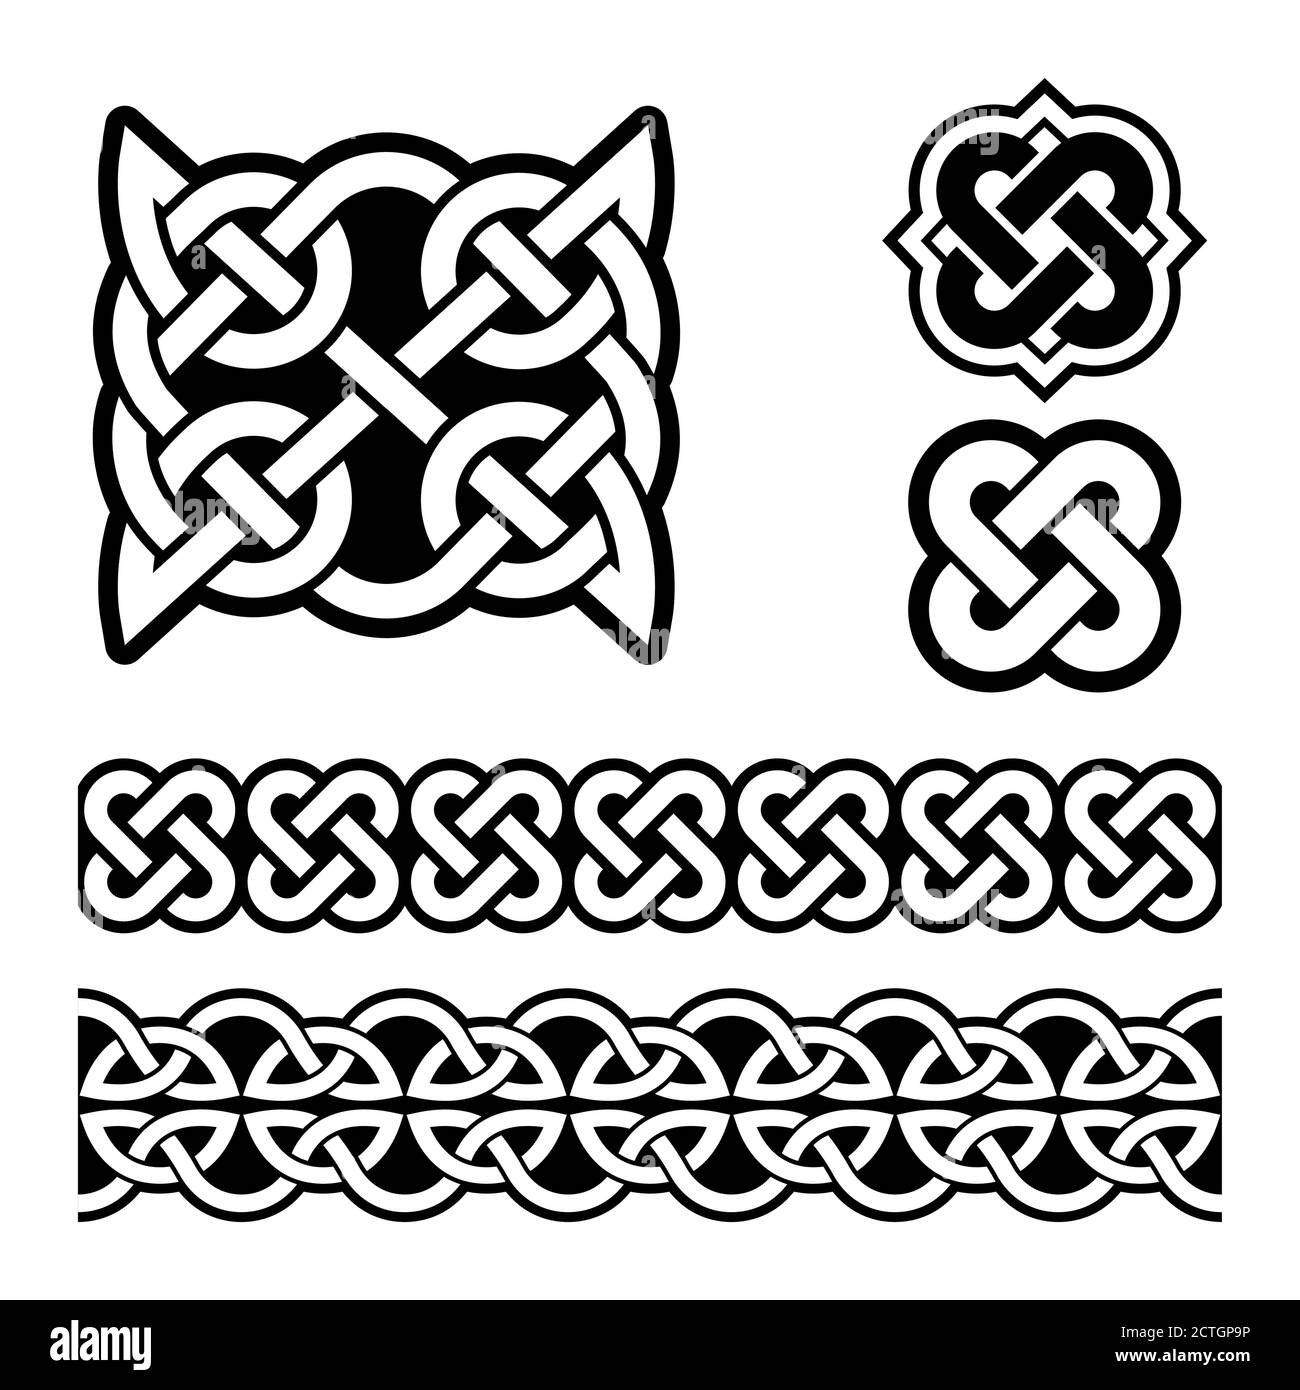 Irish Celtic braids and knots vector pattern set, traditional design elements collection inspired by Celts art from Ireland Stock Vector